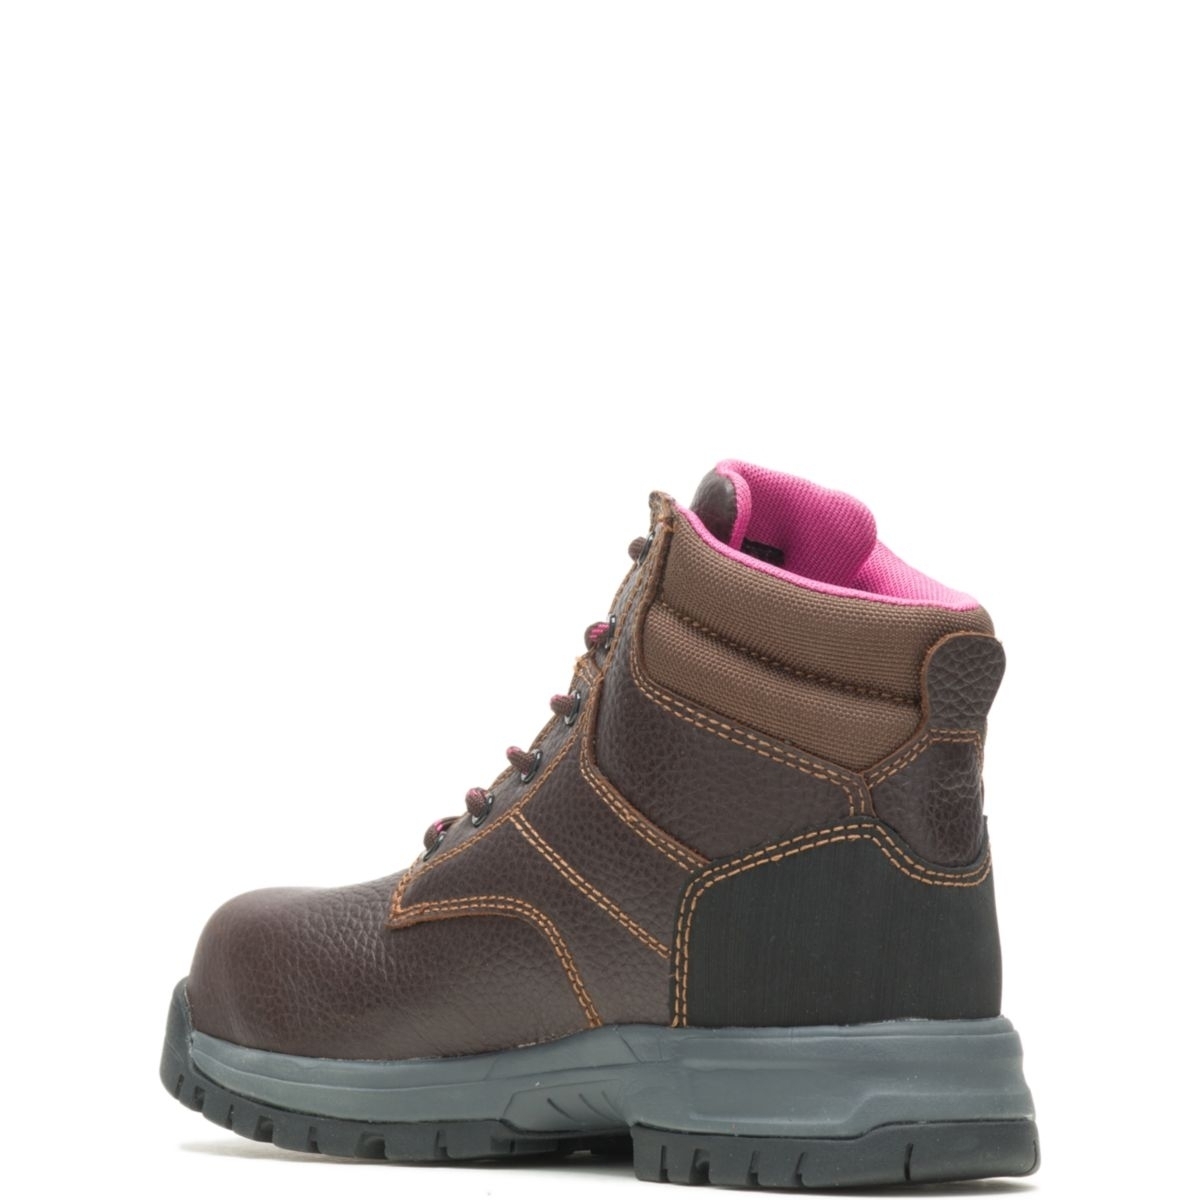 WOLVERINE Women's Piper Composite Toe Work Boot Brown - W10180 BROWN - BROWN, 7-D